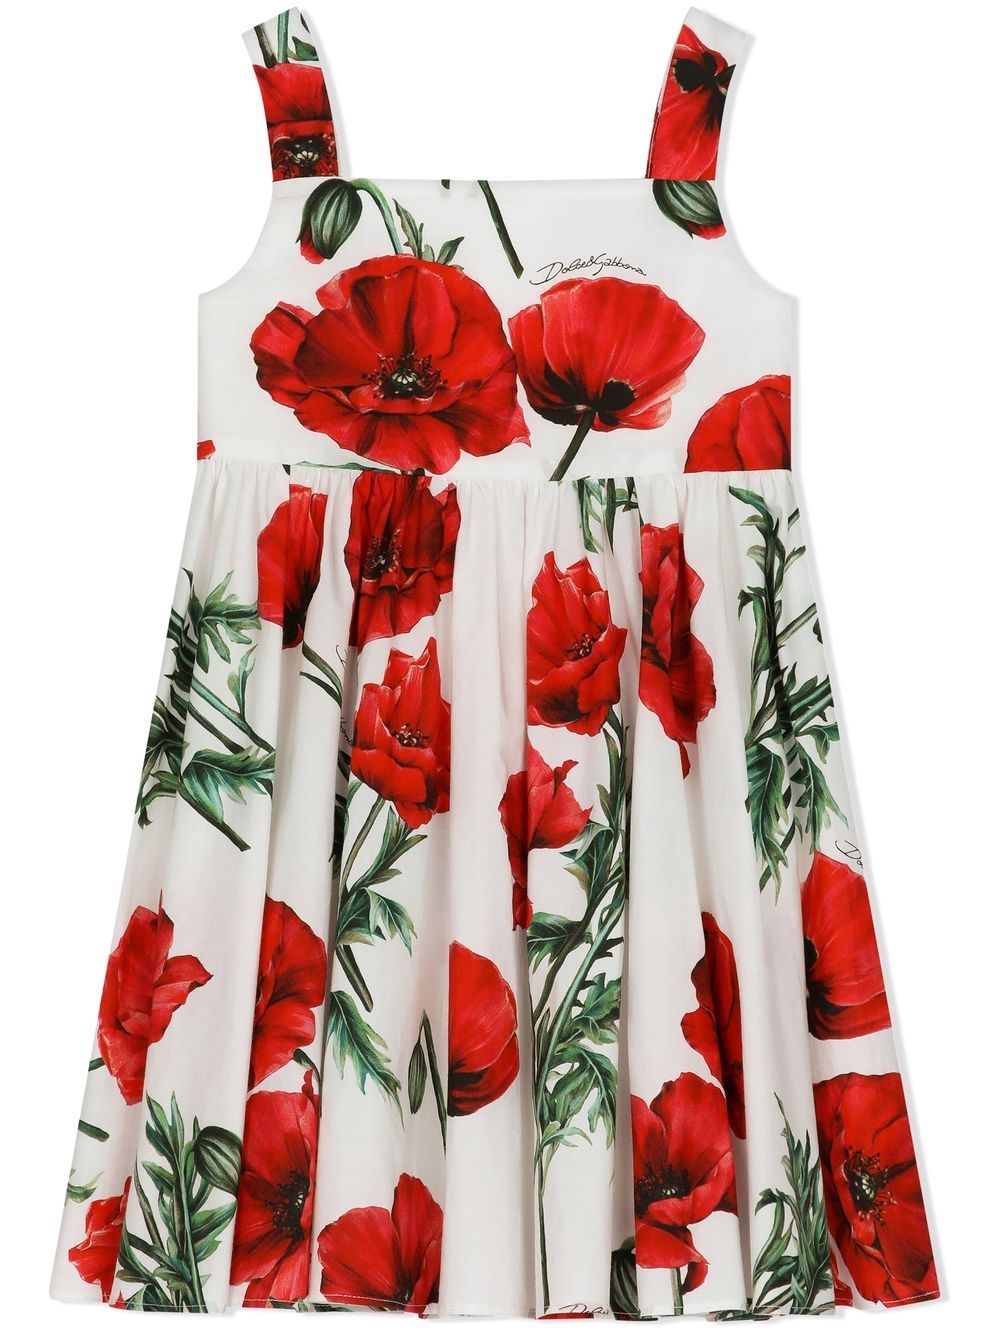 Robe fille blanche/rouge